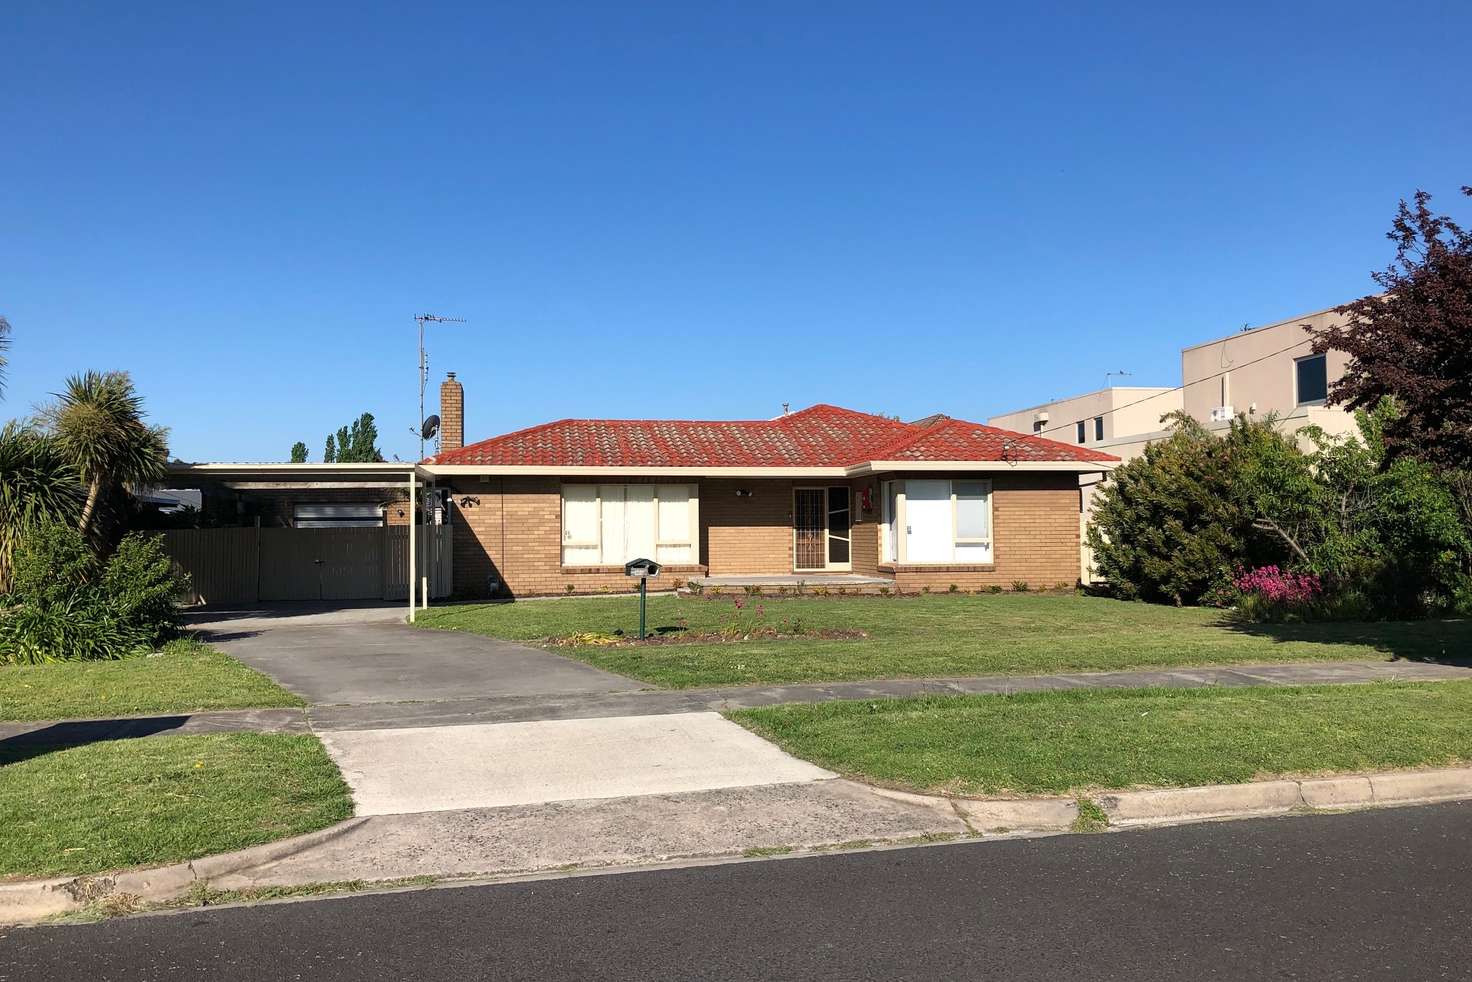 Main view of Homely house listing, 22 Peterkin St, Traralgon VIC 3844